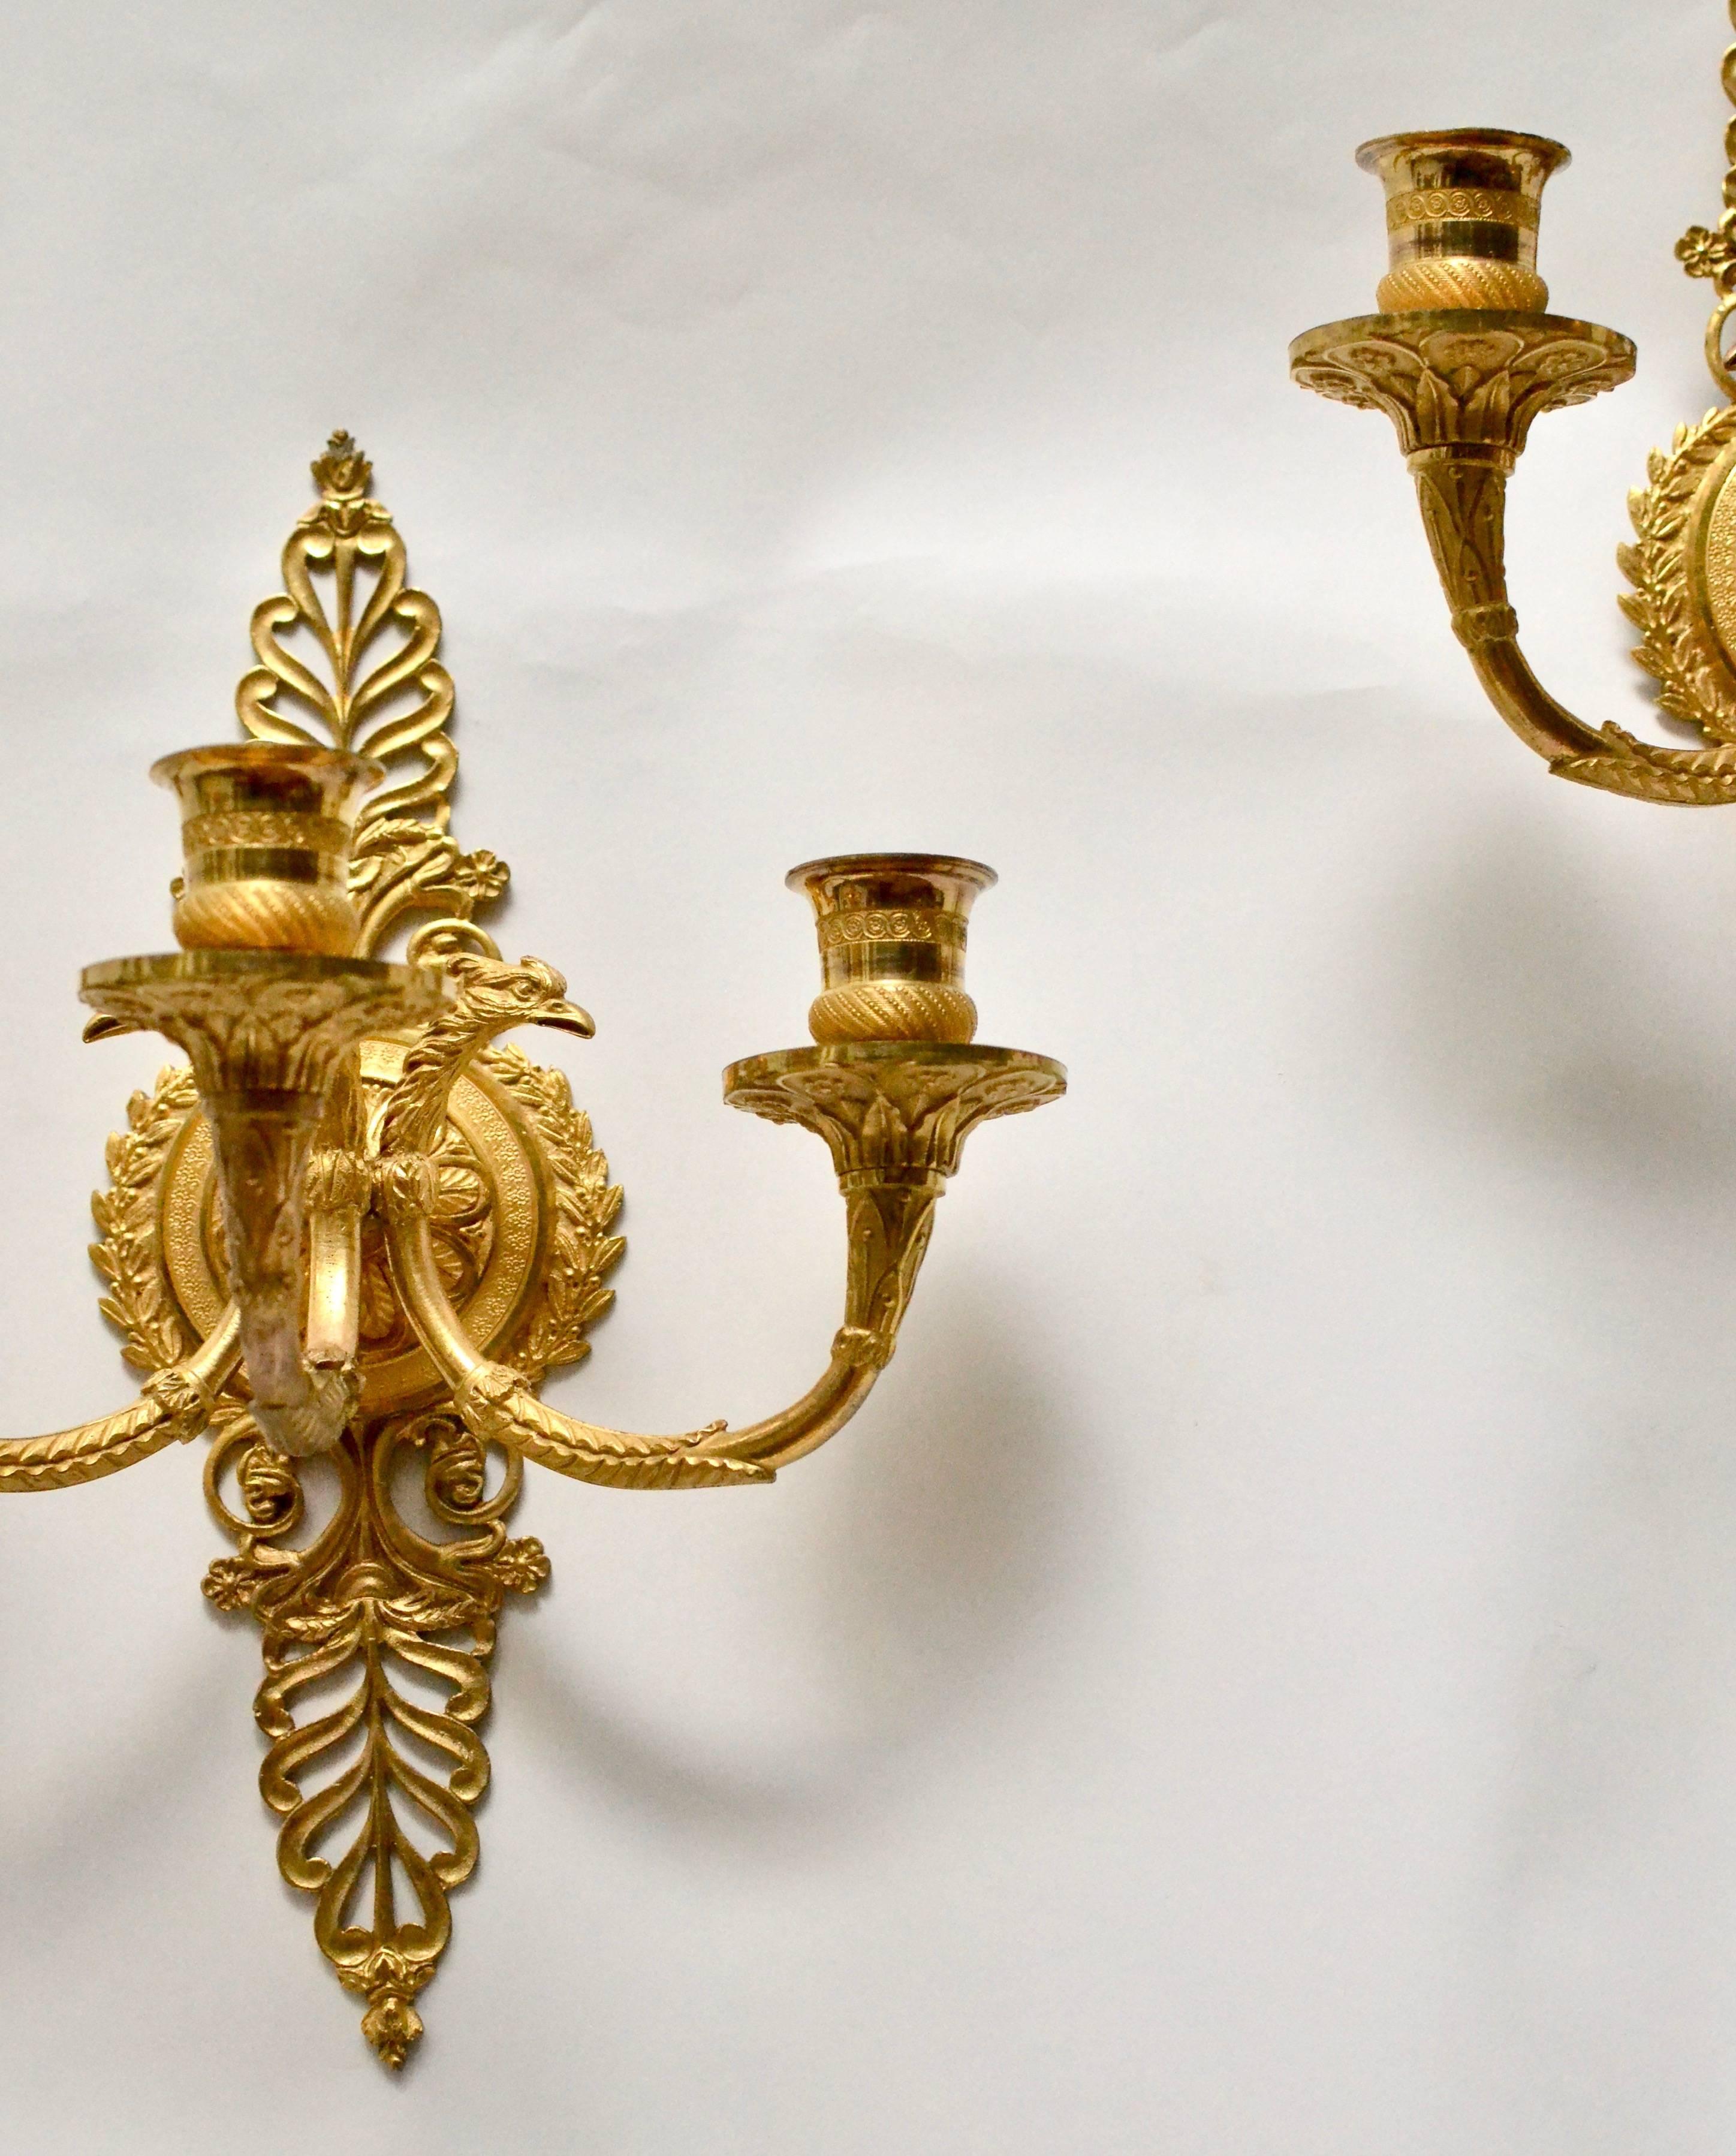 A pair of gilt bronze empire wall appliqués, early 19th century.